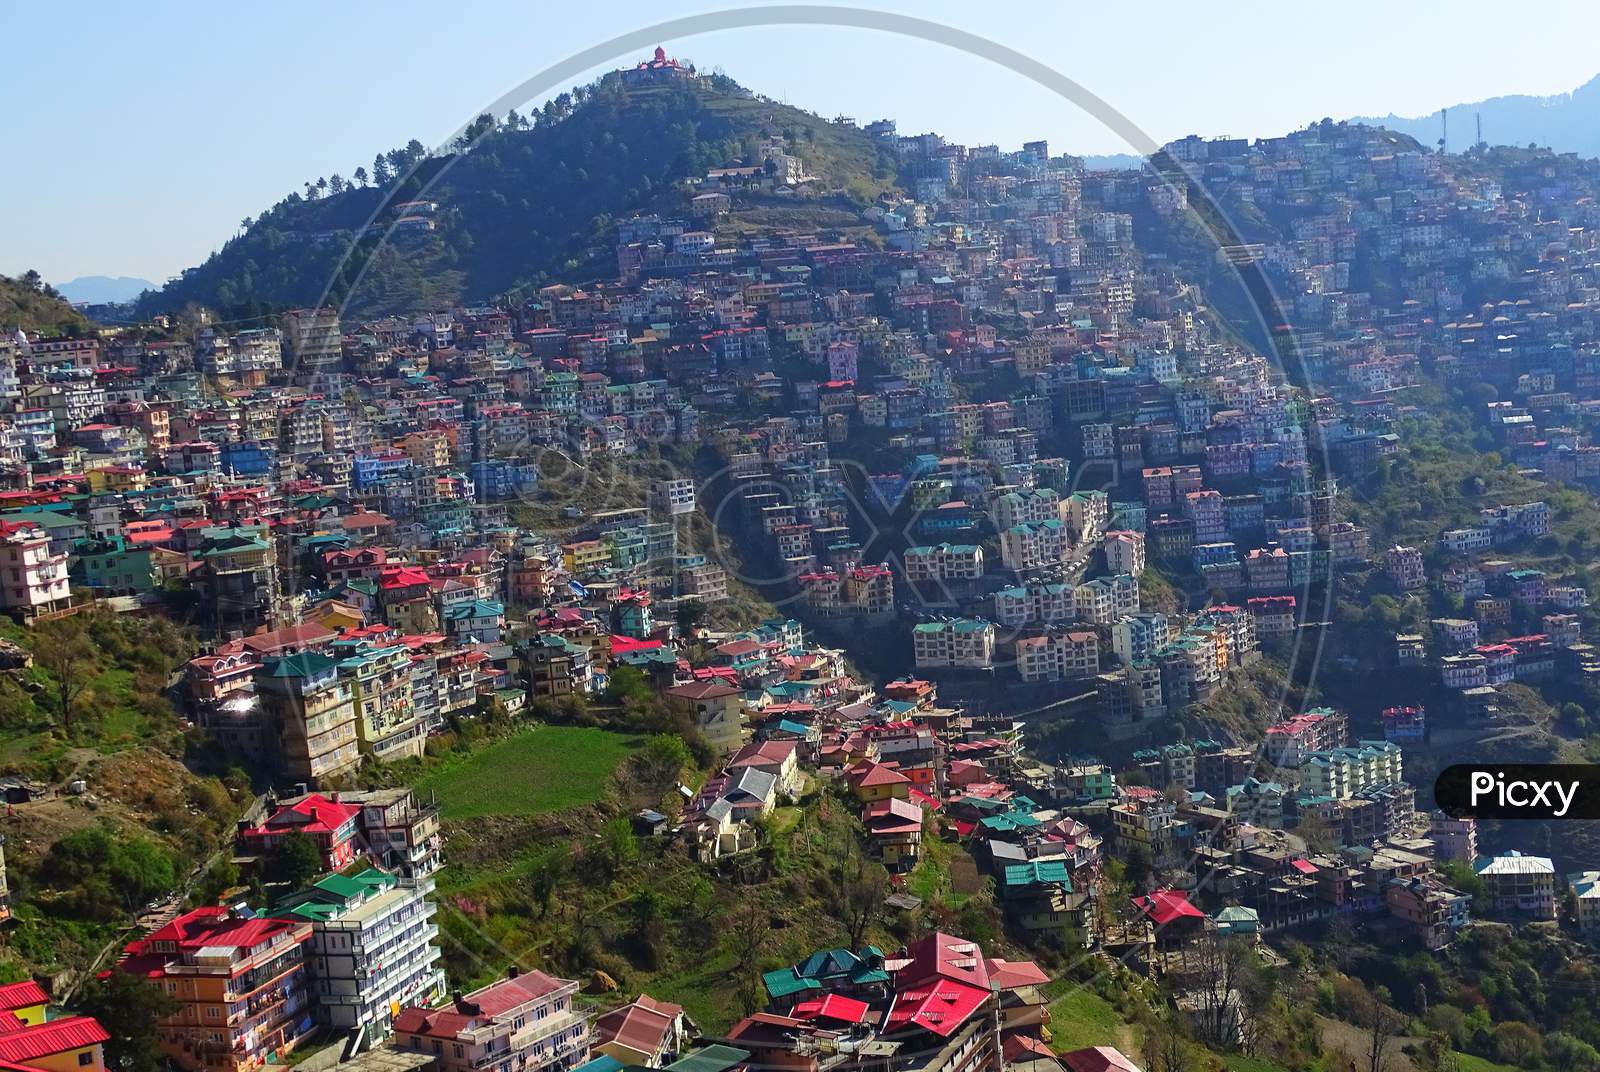 Landscape view of beautiful city Shimla situated in himachal pradesh in the mountain range of great himalayas at sunrise time with houses, trees and birds